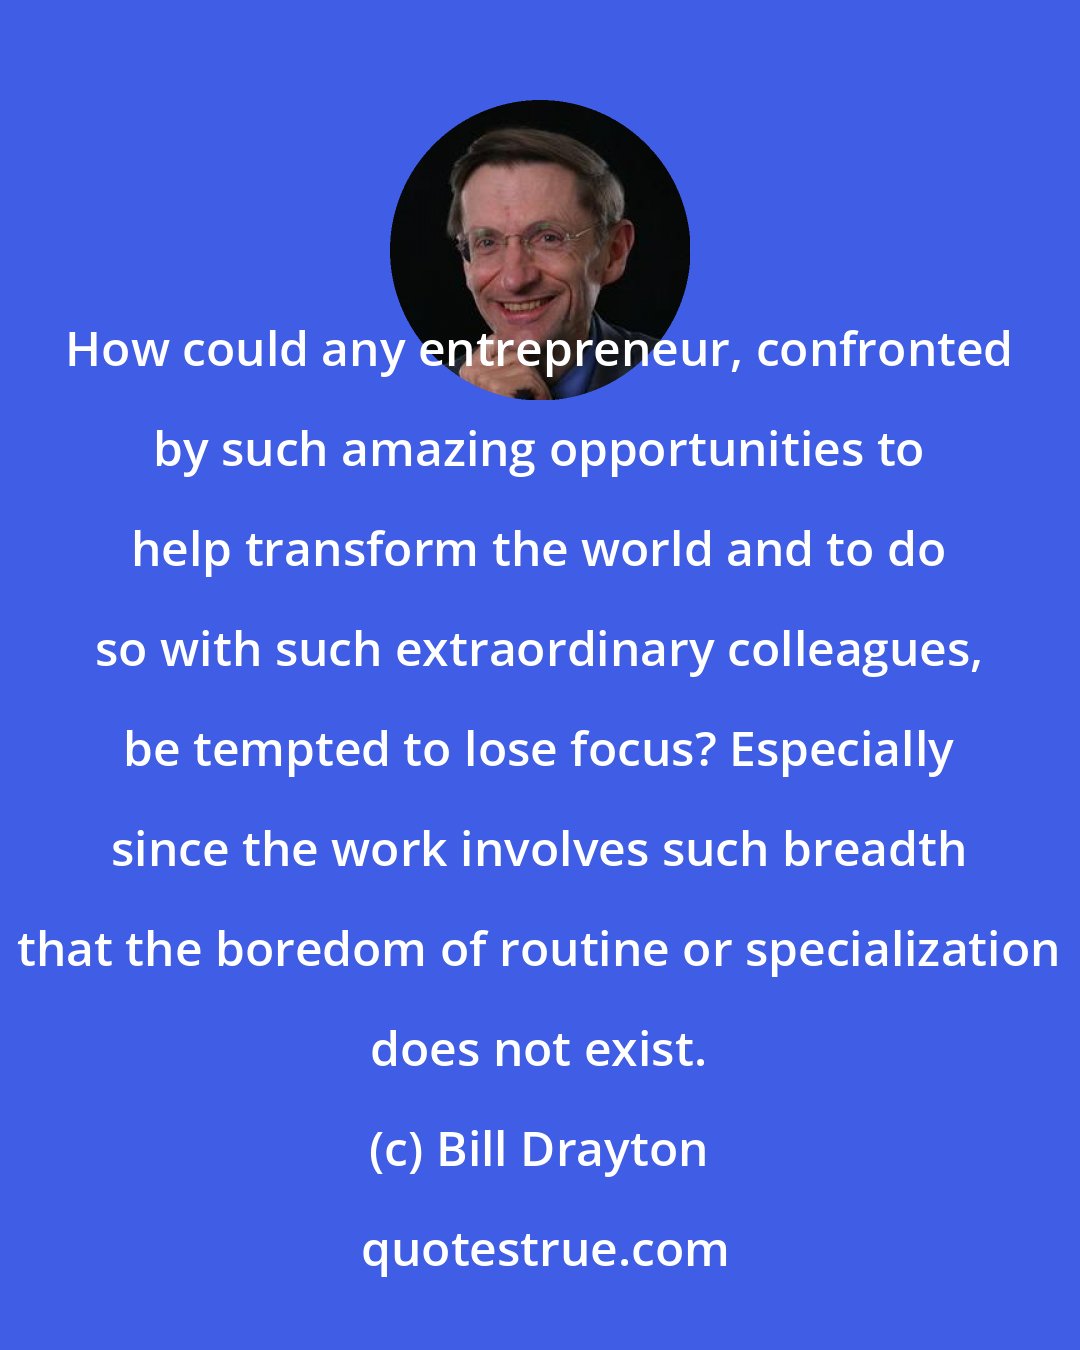 Bill Drayton: How could any entrepreneur, confronted by such amazing opportunities to help transform the world and to do so with such extraordinary colleagues, be tempted to lose focus? Especially since the work involves such breadth that the boredom of routine or specialization does not exist.